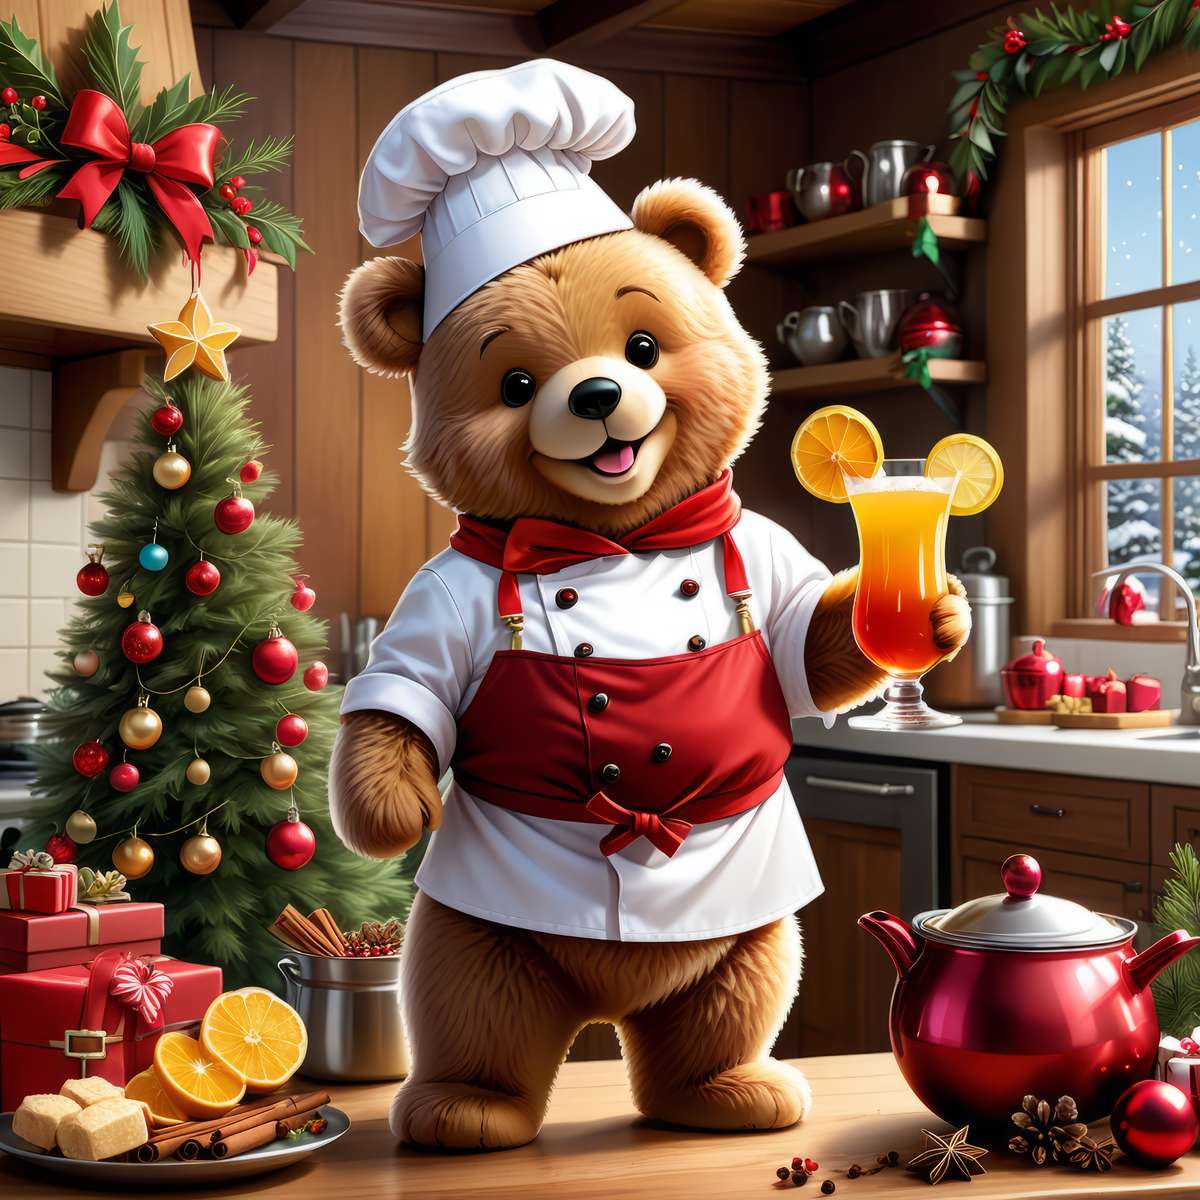 The chef bear online puzzle